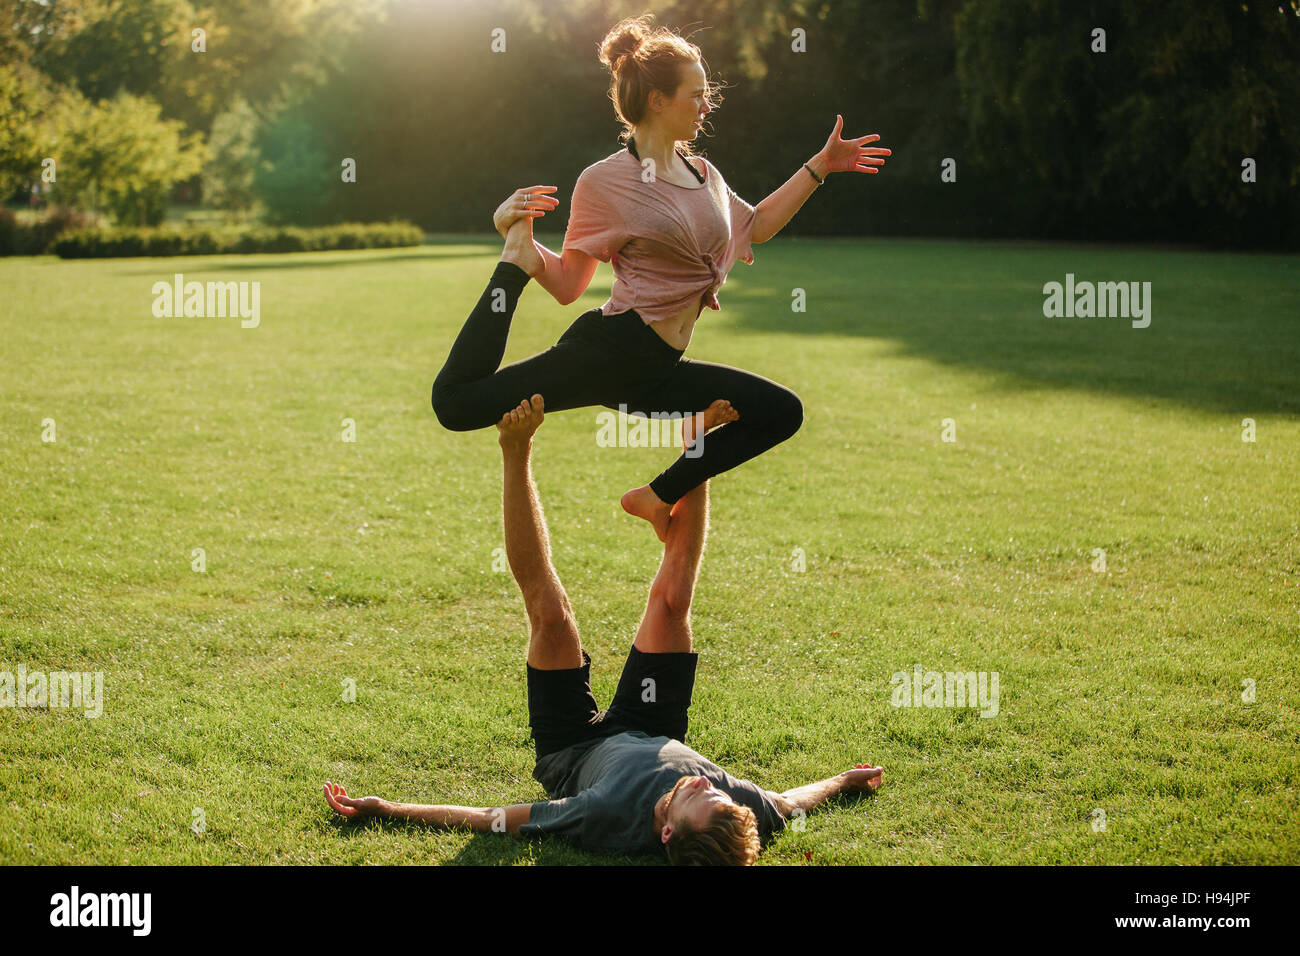 Man and woman doing various yoga poses in pair outdoors. Fit couple doing acro yoga in park, man balancing woman on his feet. Stock Photo